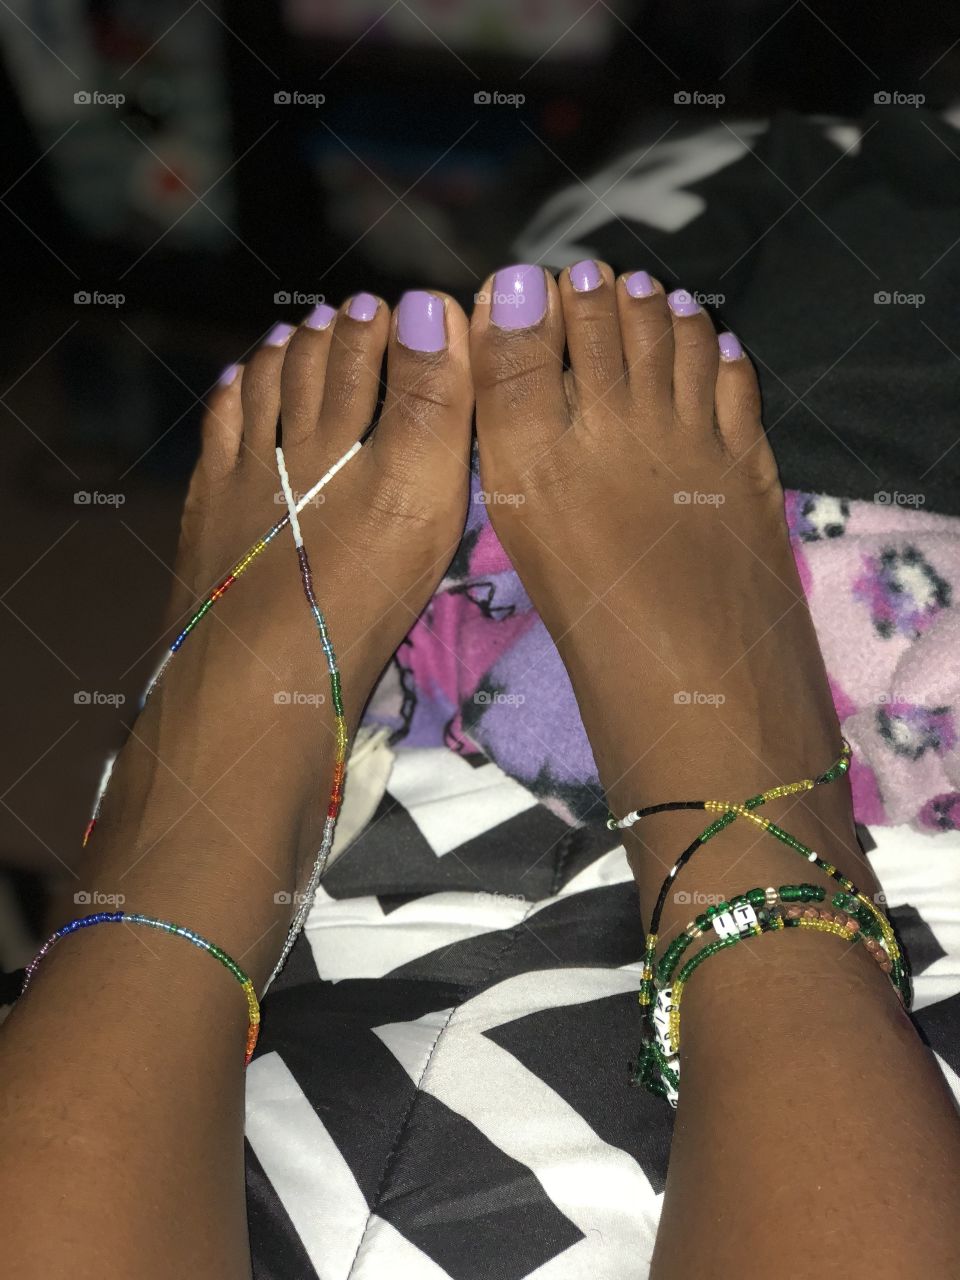 Cute chocolate feet with slamming nail polish and ankle beads 